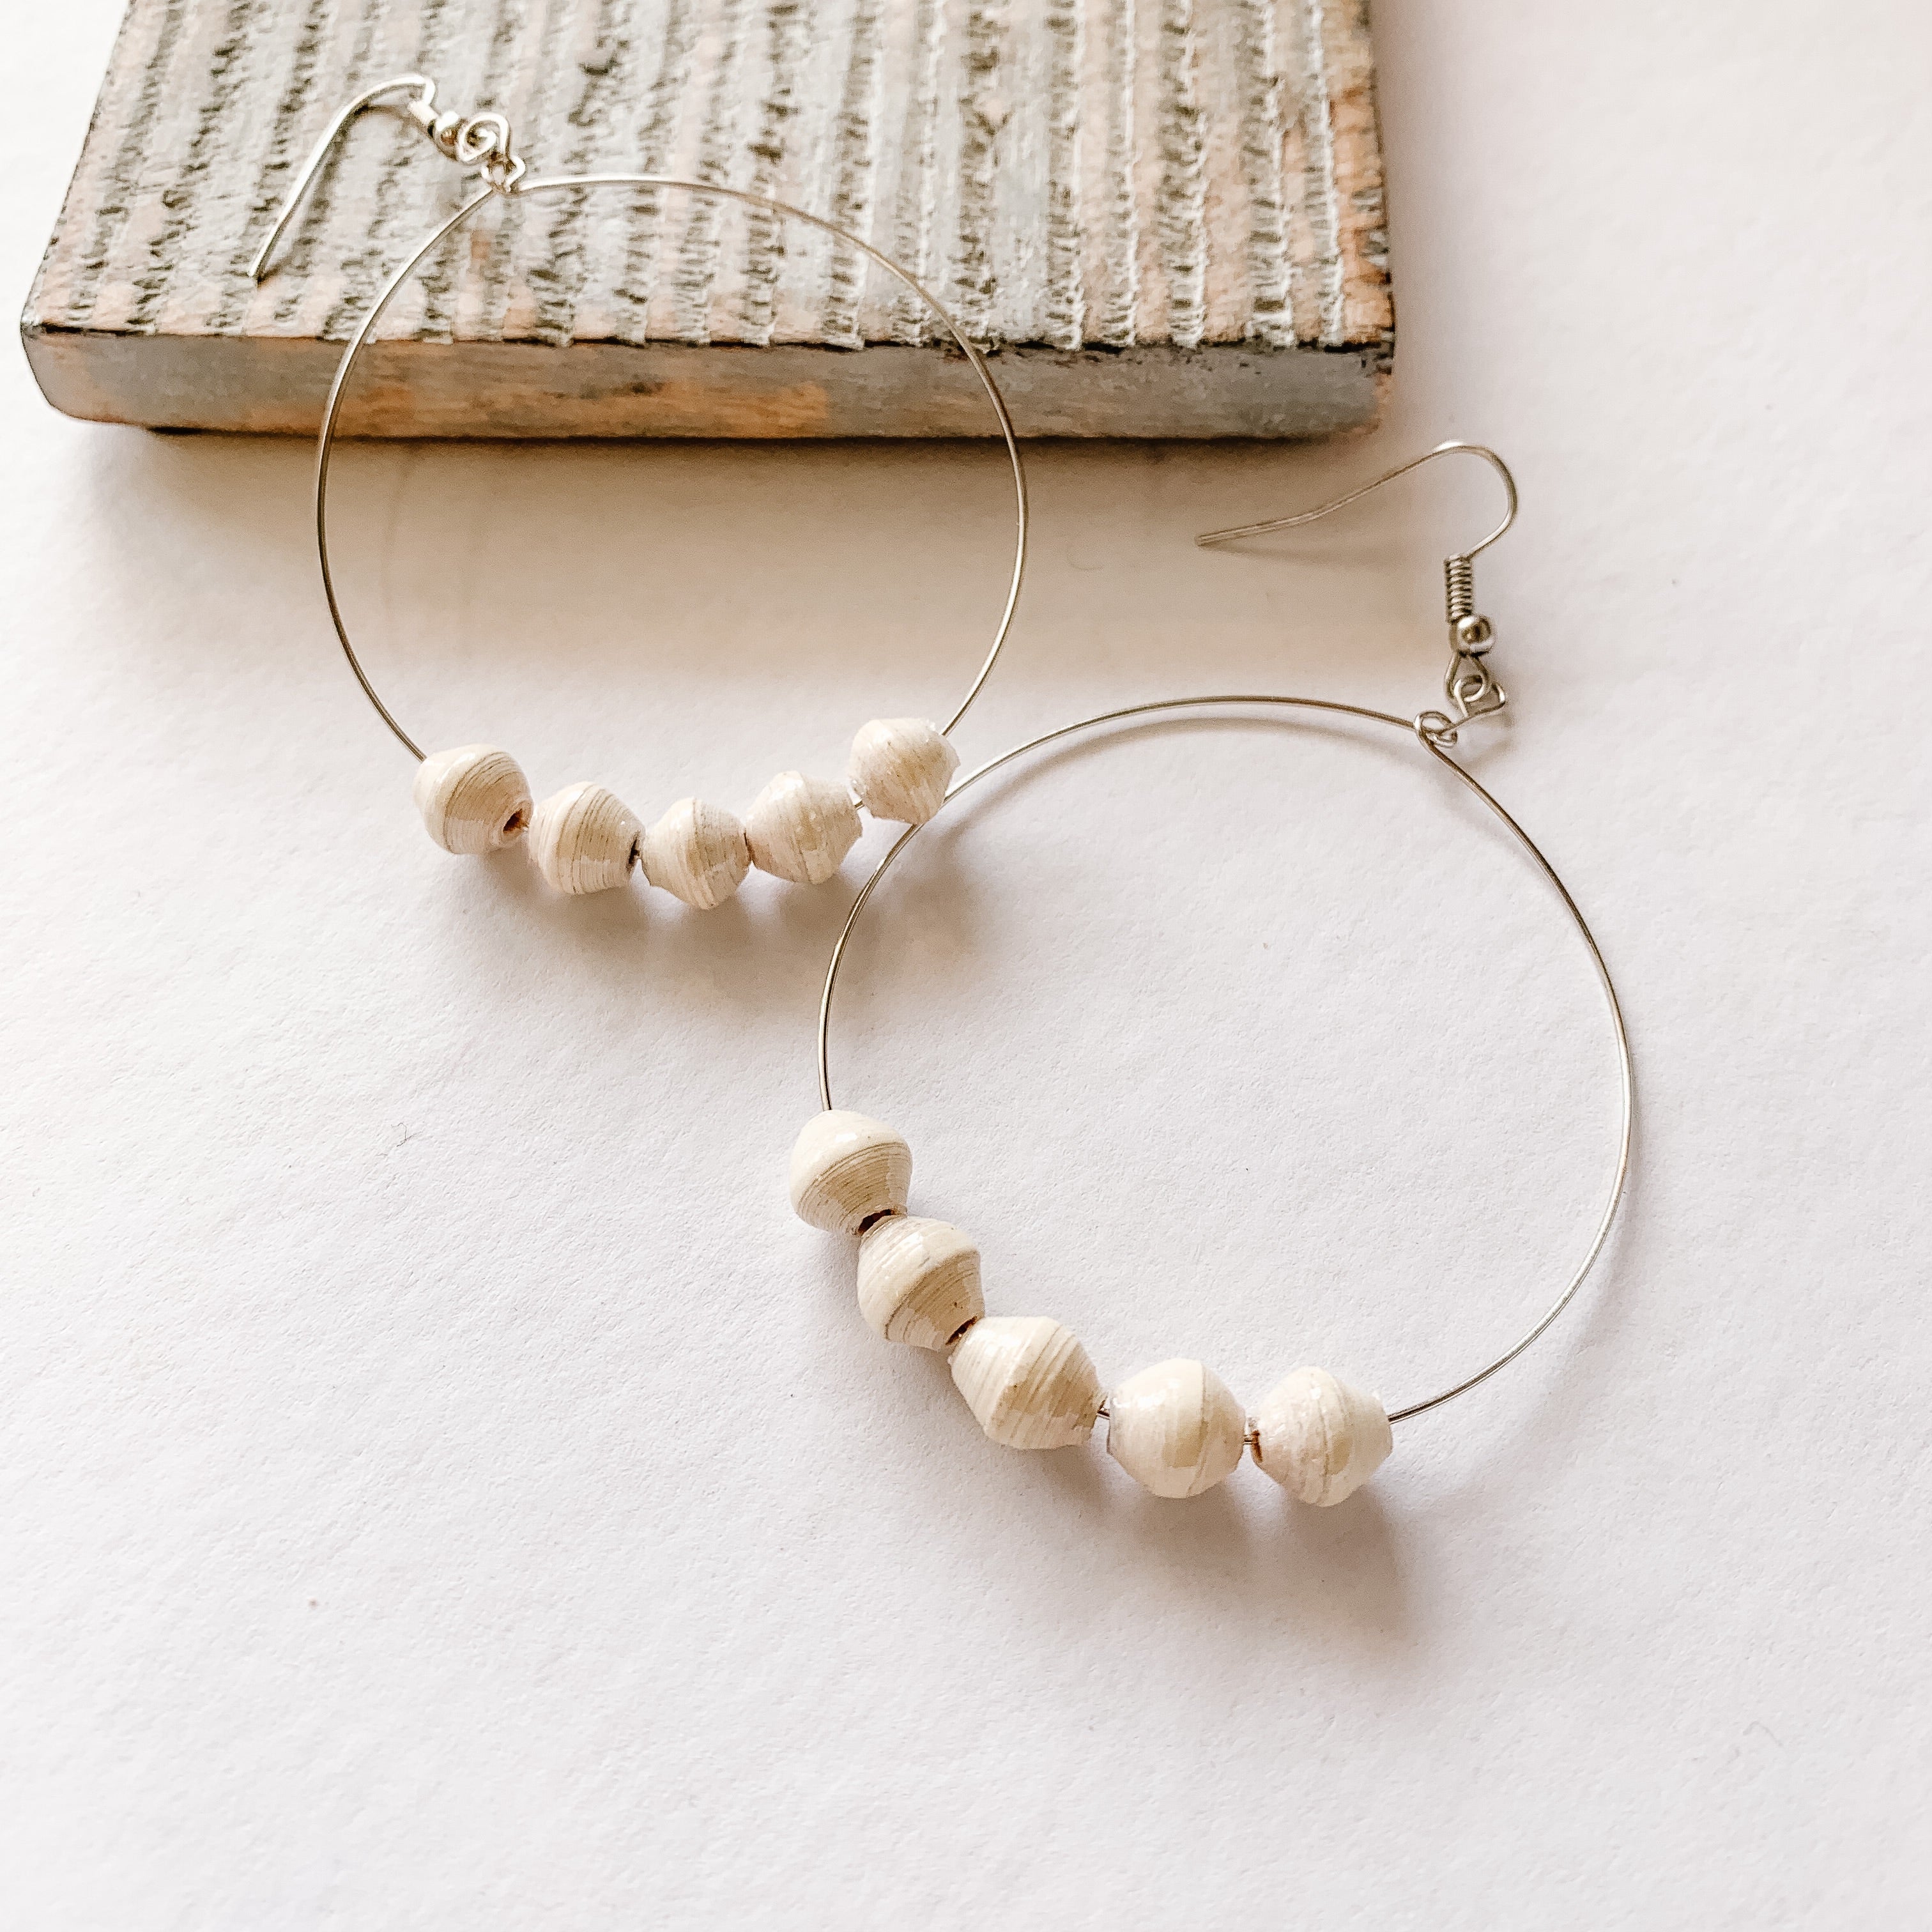 JustOne's silver hoop earrings with five white paper beads on the bottom of the hoop, handcrafted in Uganda